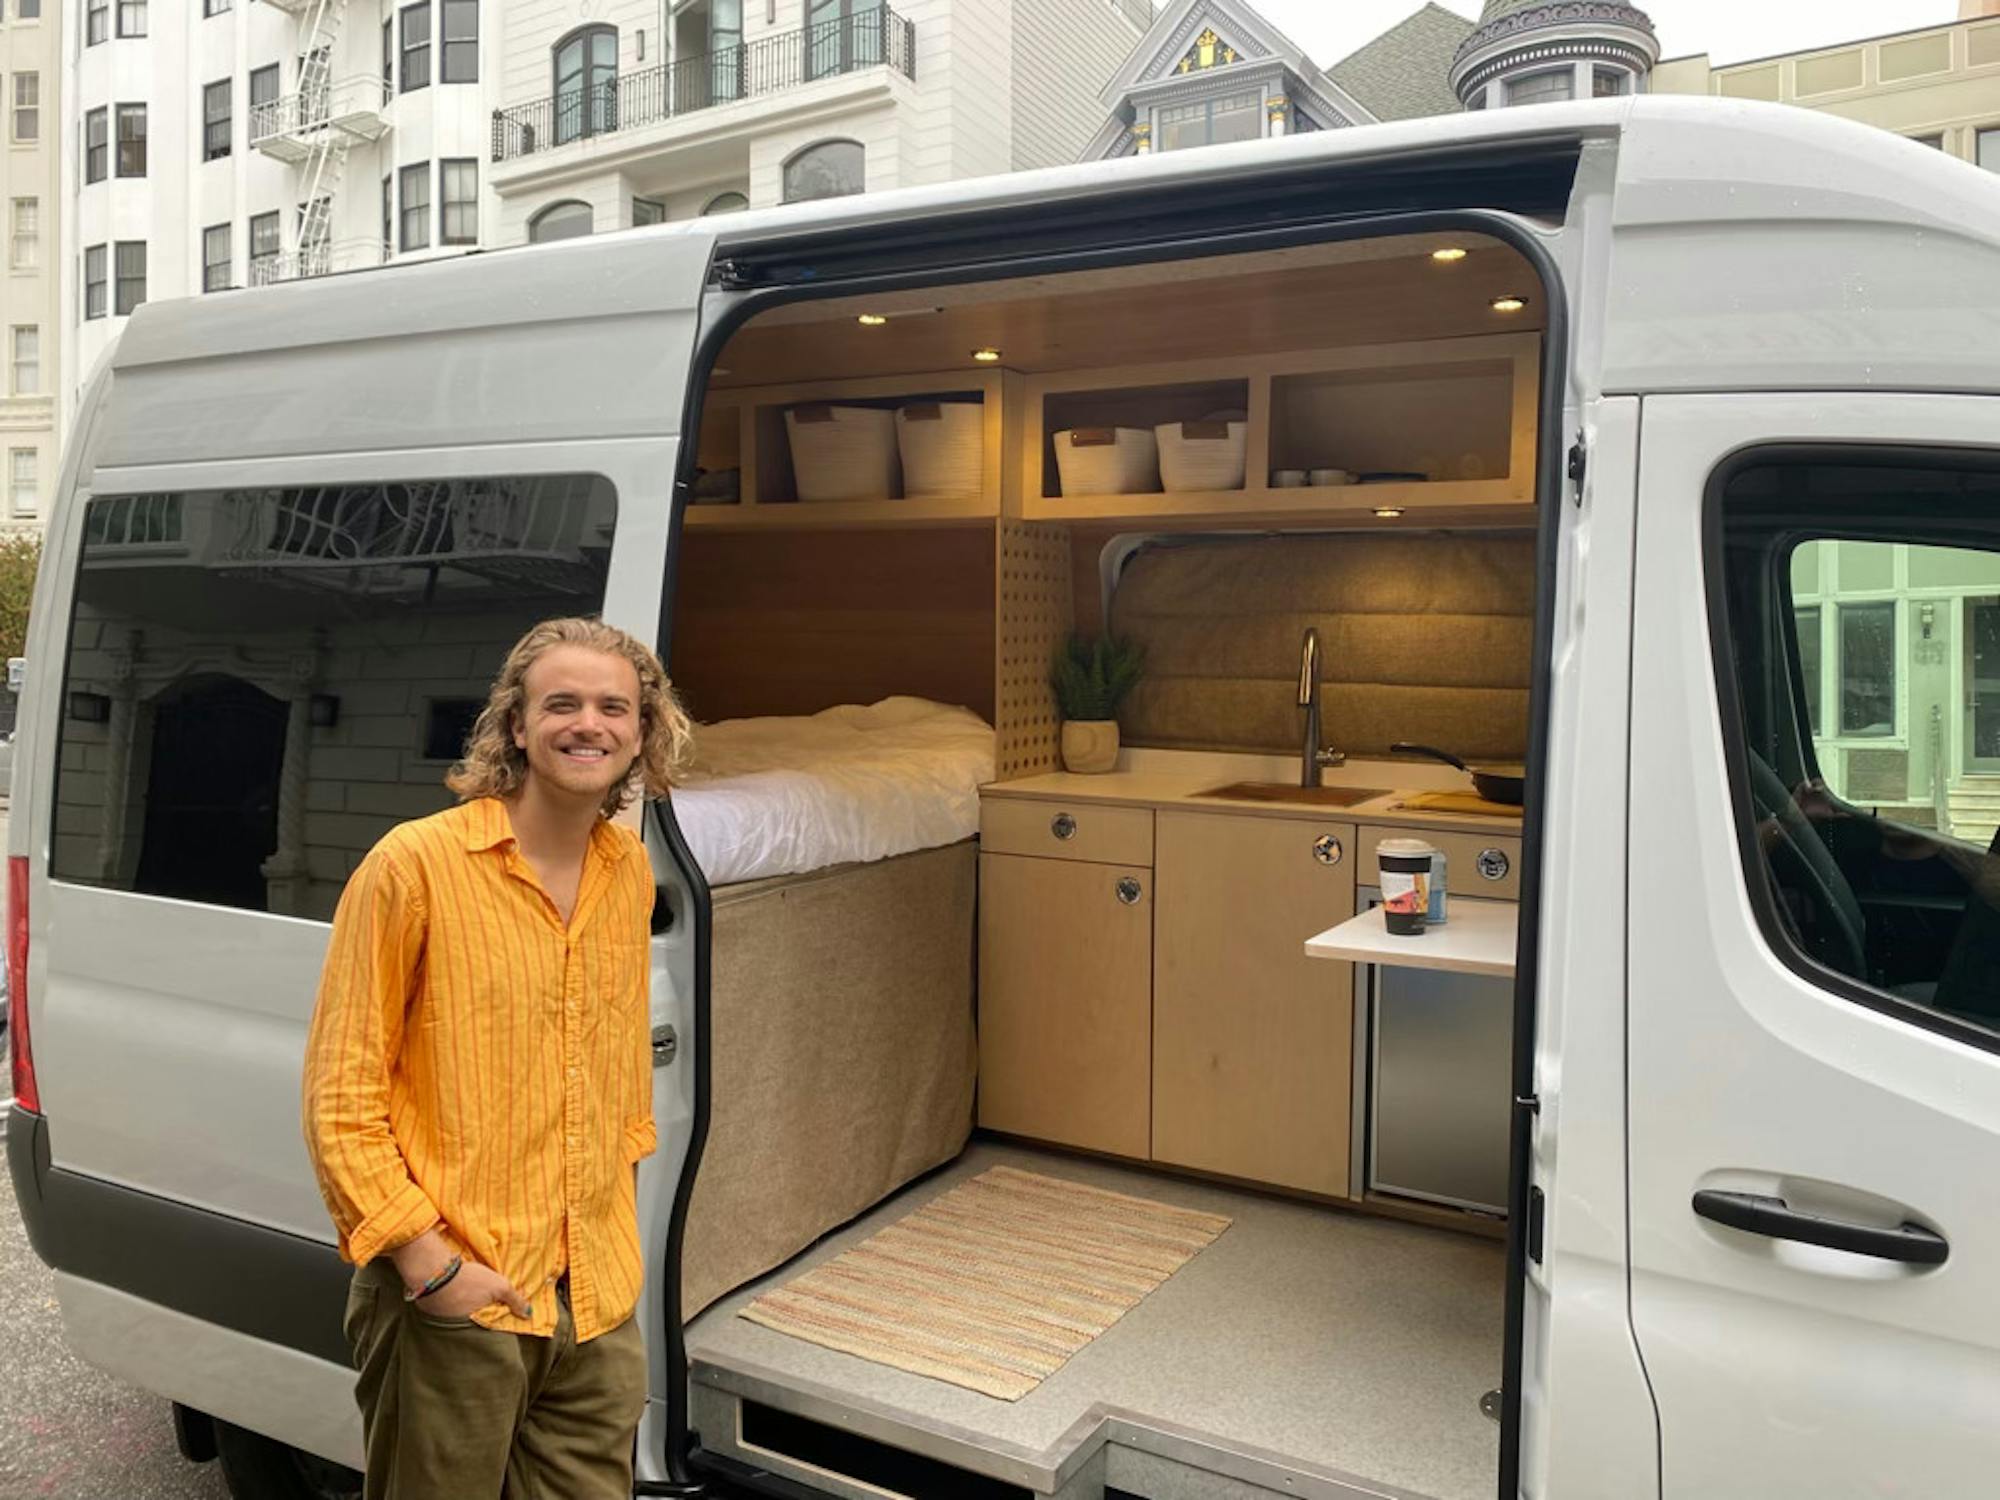 A young man in a loose yellow shirt stands smiling next to a van with an open door, revealing a furnished space inside with bed, sink, and small table.